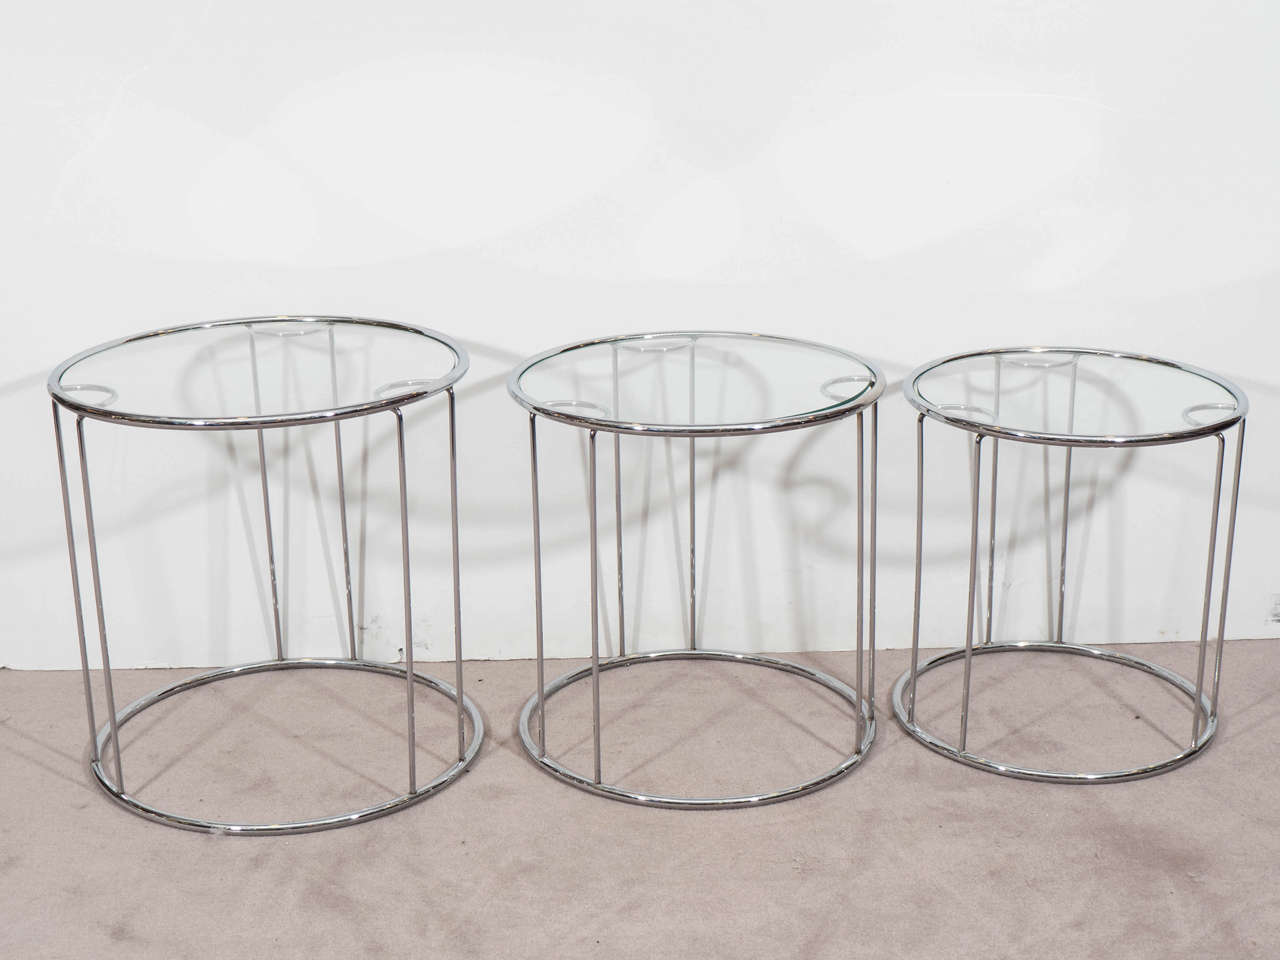 A vintage set of three, cylindrical nesting tables, with chrome and glass tops, designed by Milo Baughman, circa 1960s. Good vintage condition, with age appropriate wear.